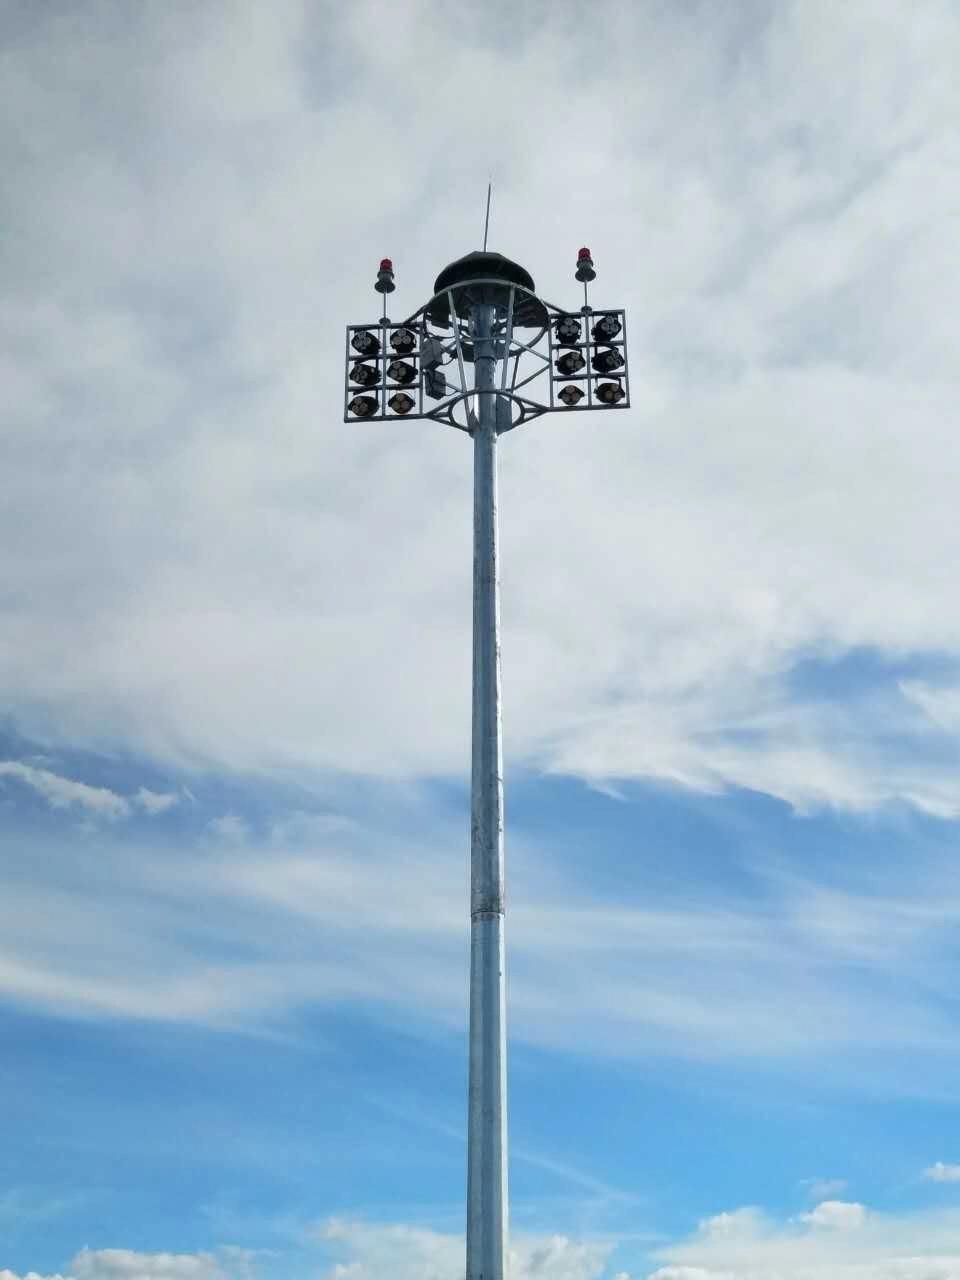 High Mast Light for Cricket Field Lighting with Reasonable Price